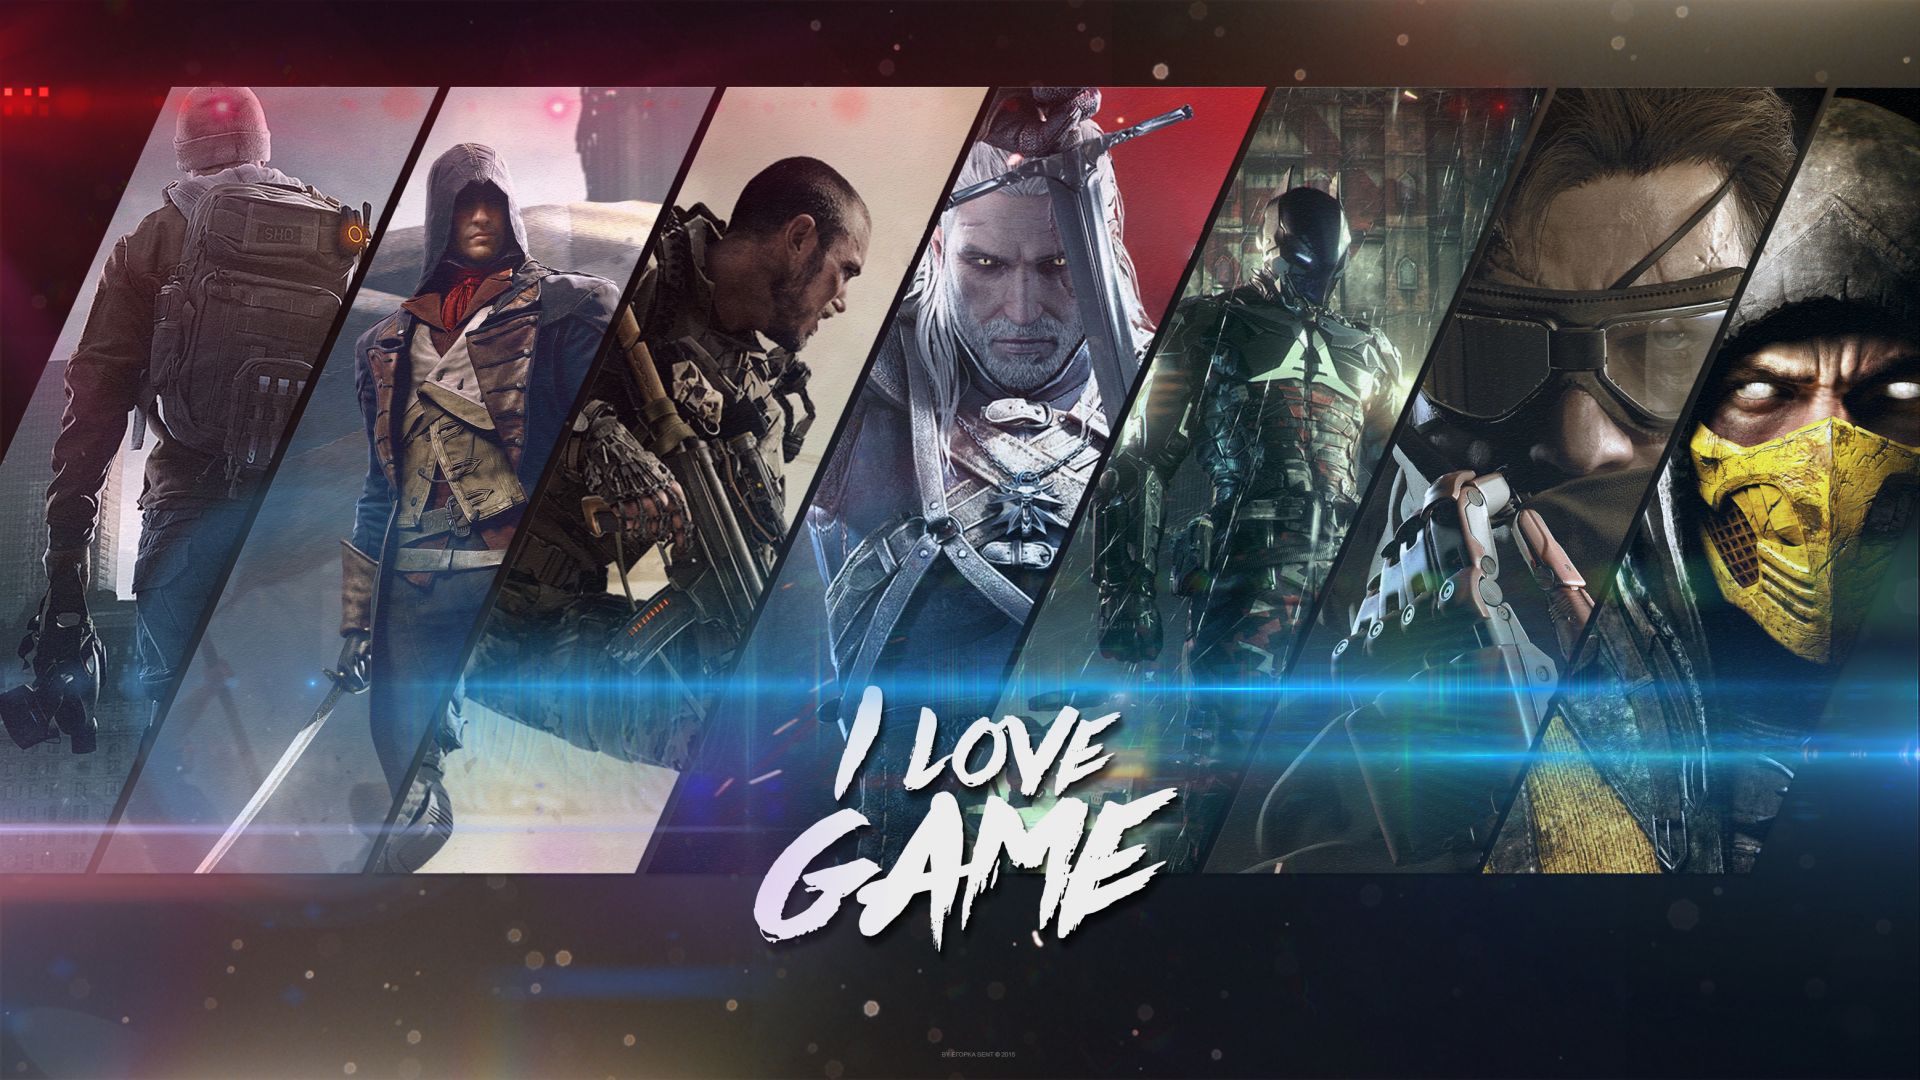 Wallpaper I love game, gaming, video games